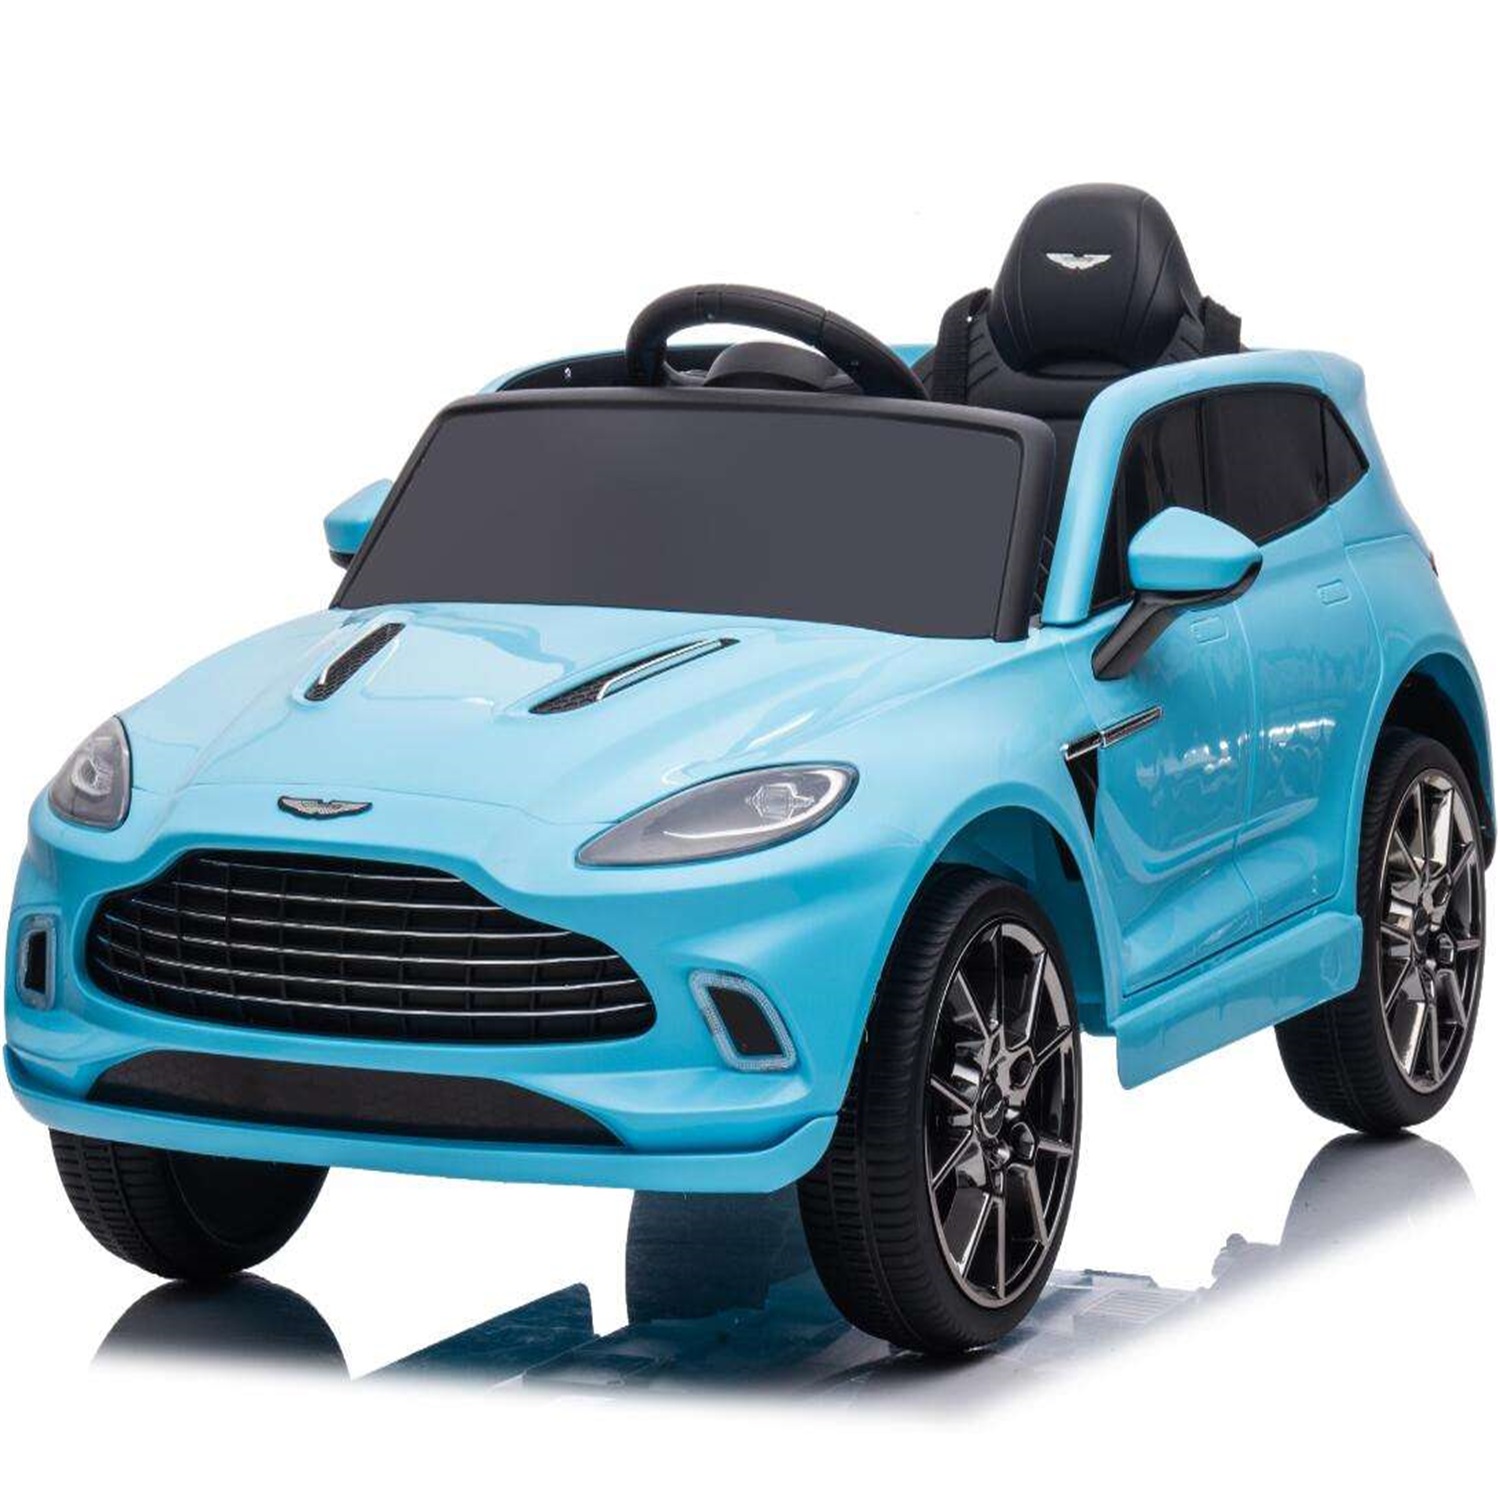 Aston Martin Brand License Child Electric Car Toys For Kids 6V Battery Ride On Car Music Lights Toy